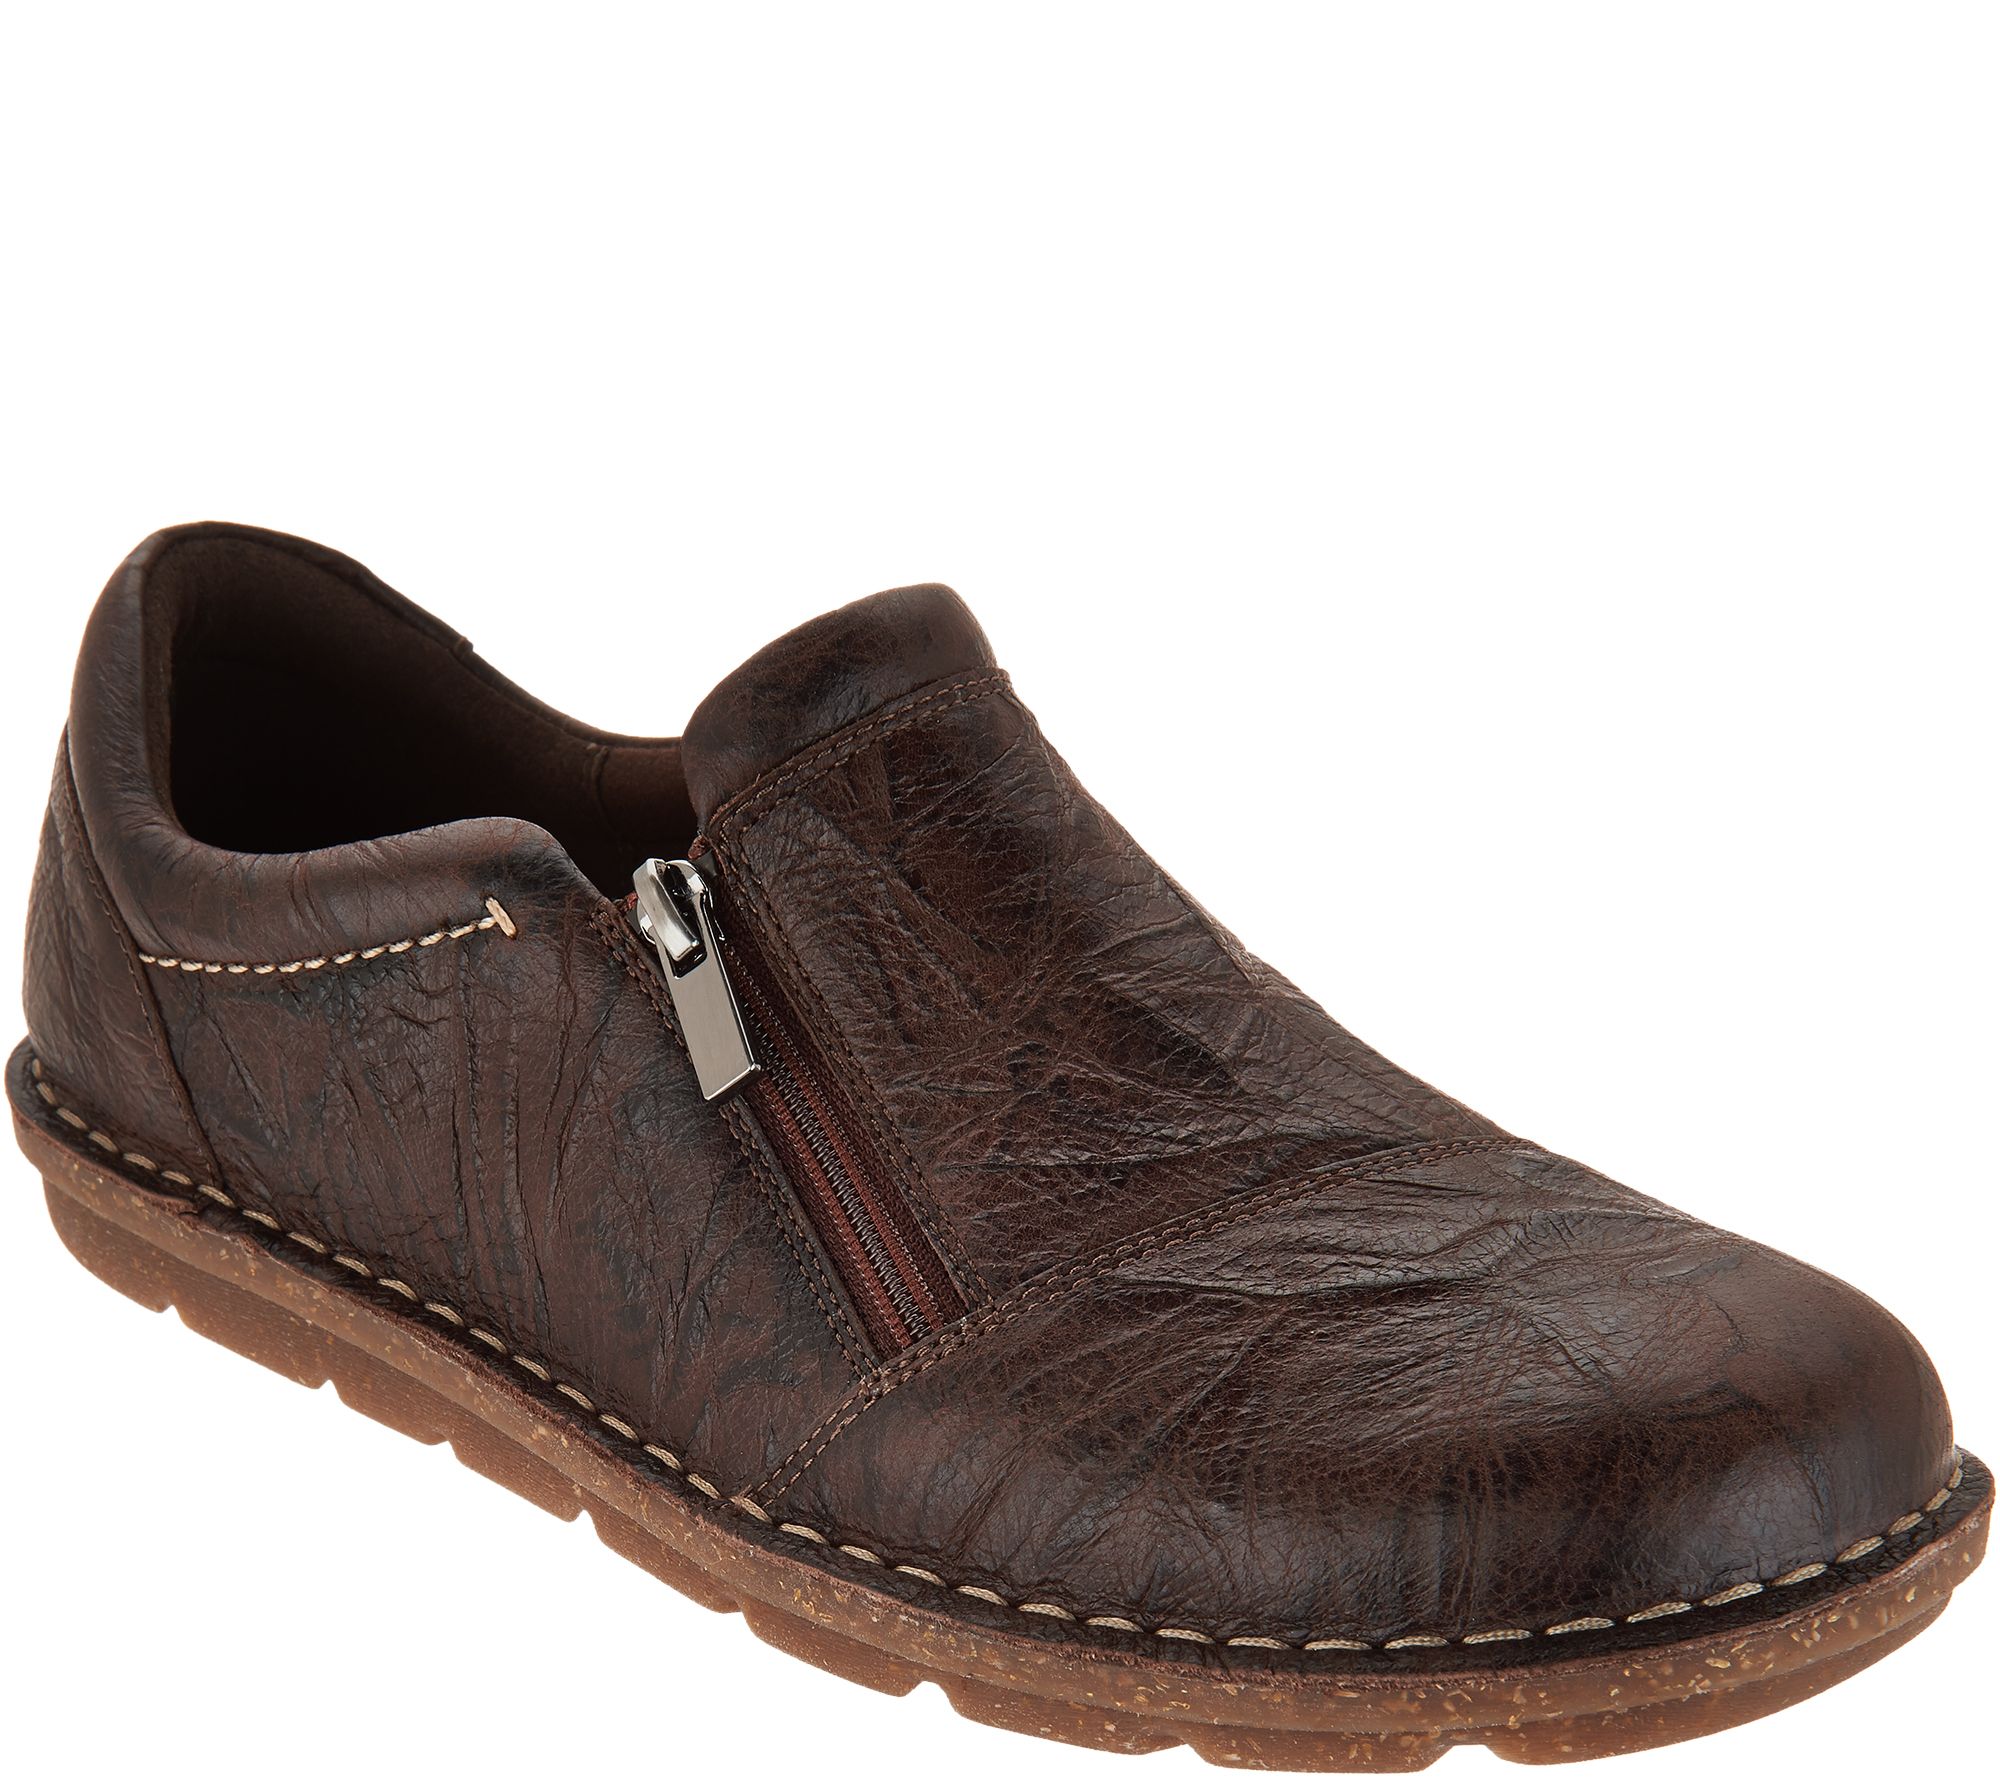 Clarks Leather Slip on Shoes with Side Zip- Tamitha Cattura - Page 1 ...